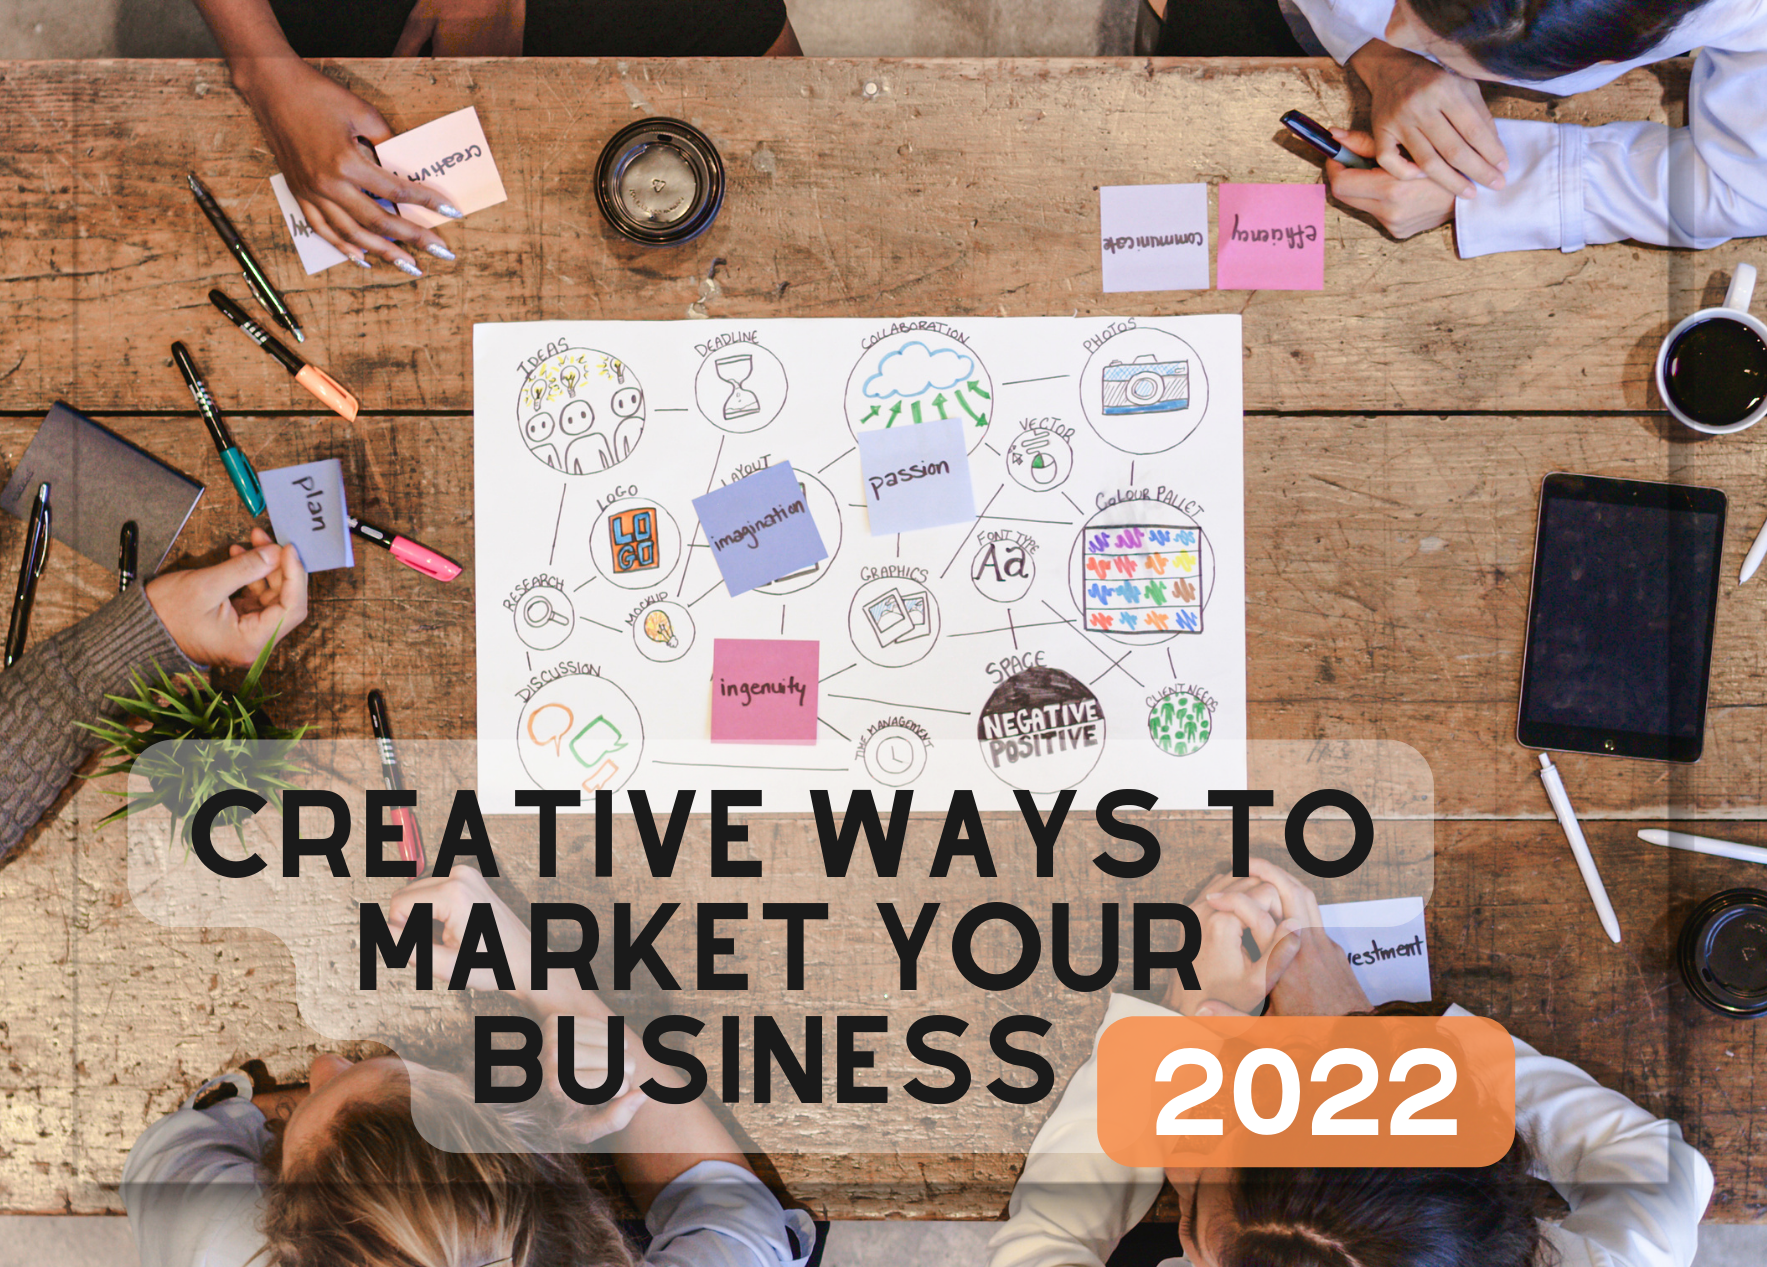 How to market your business in a creative way